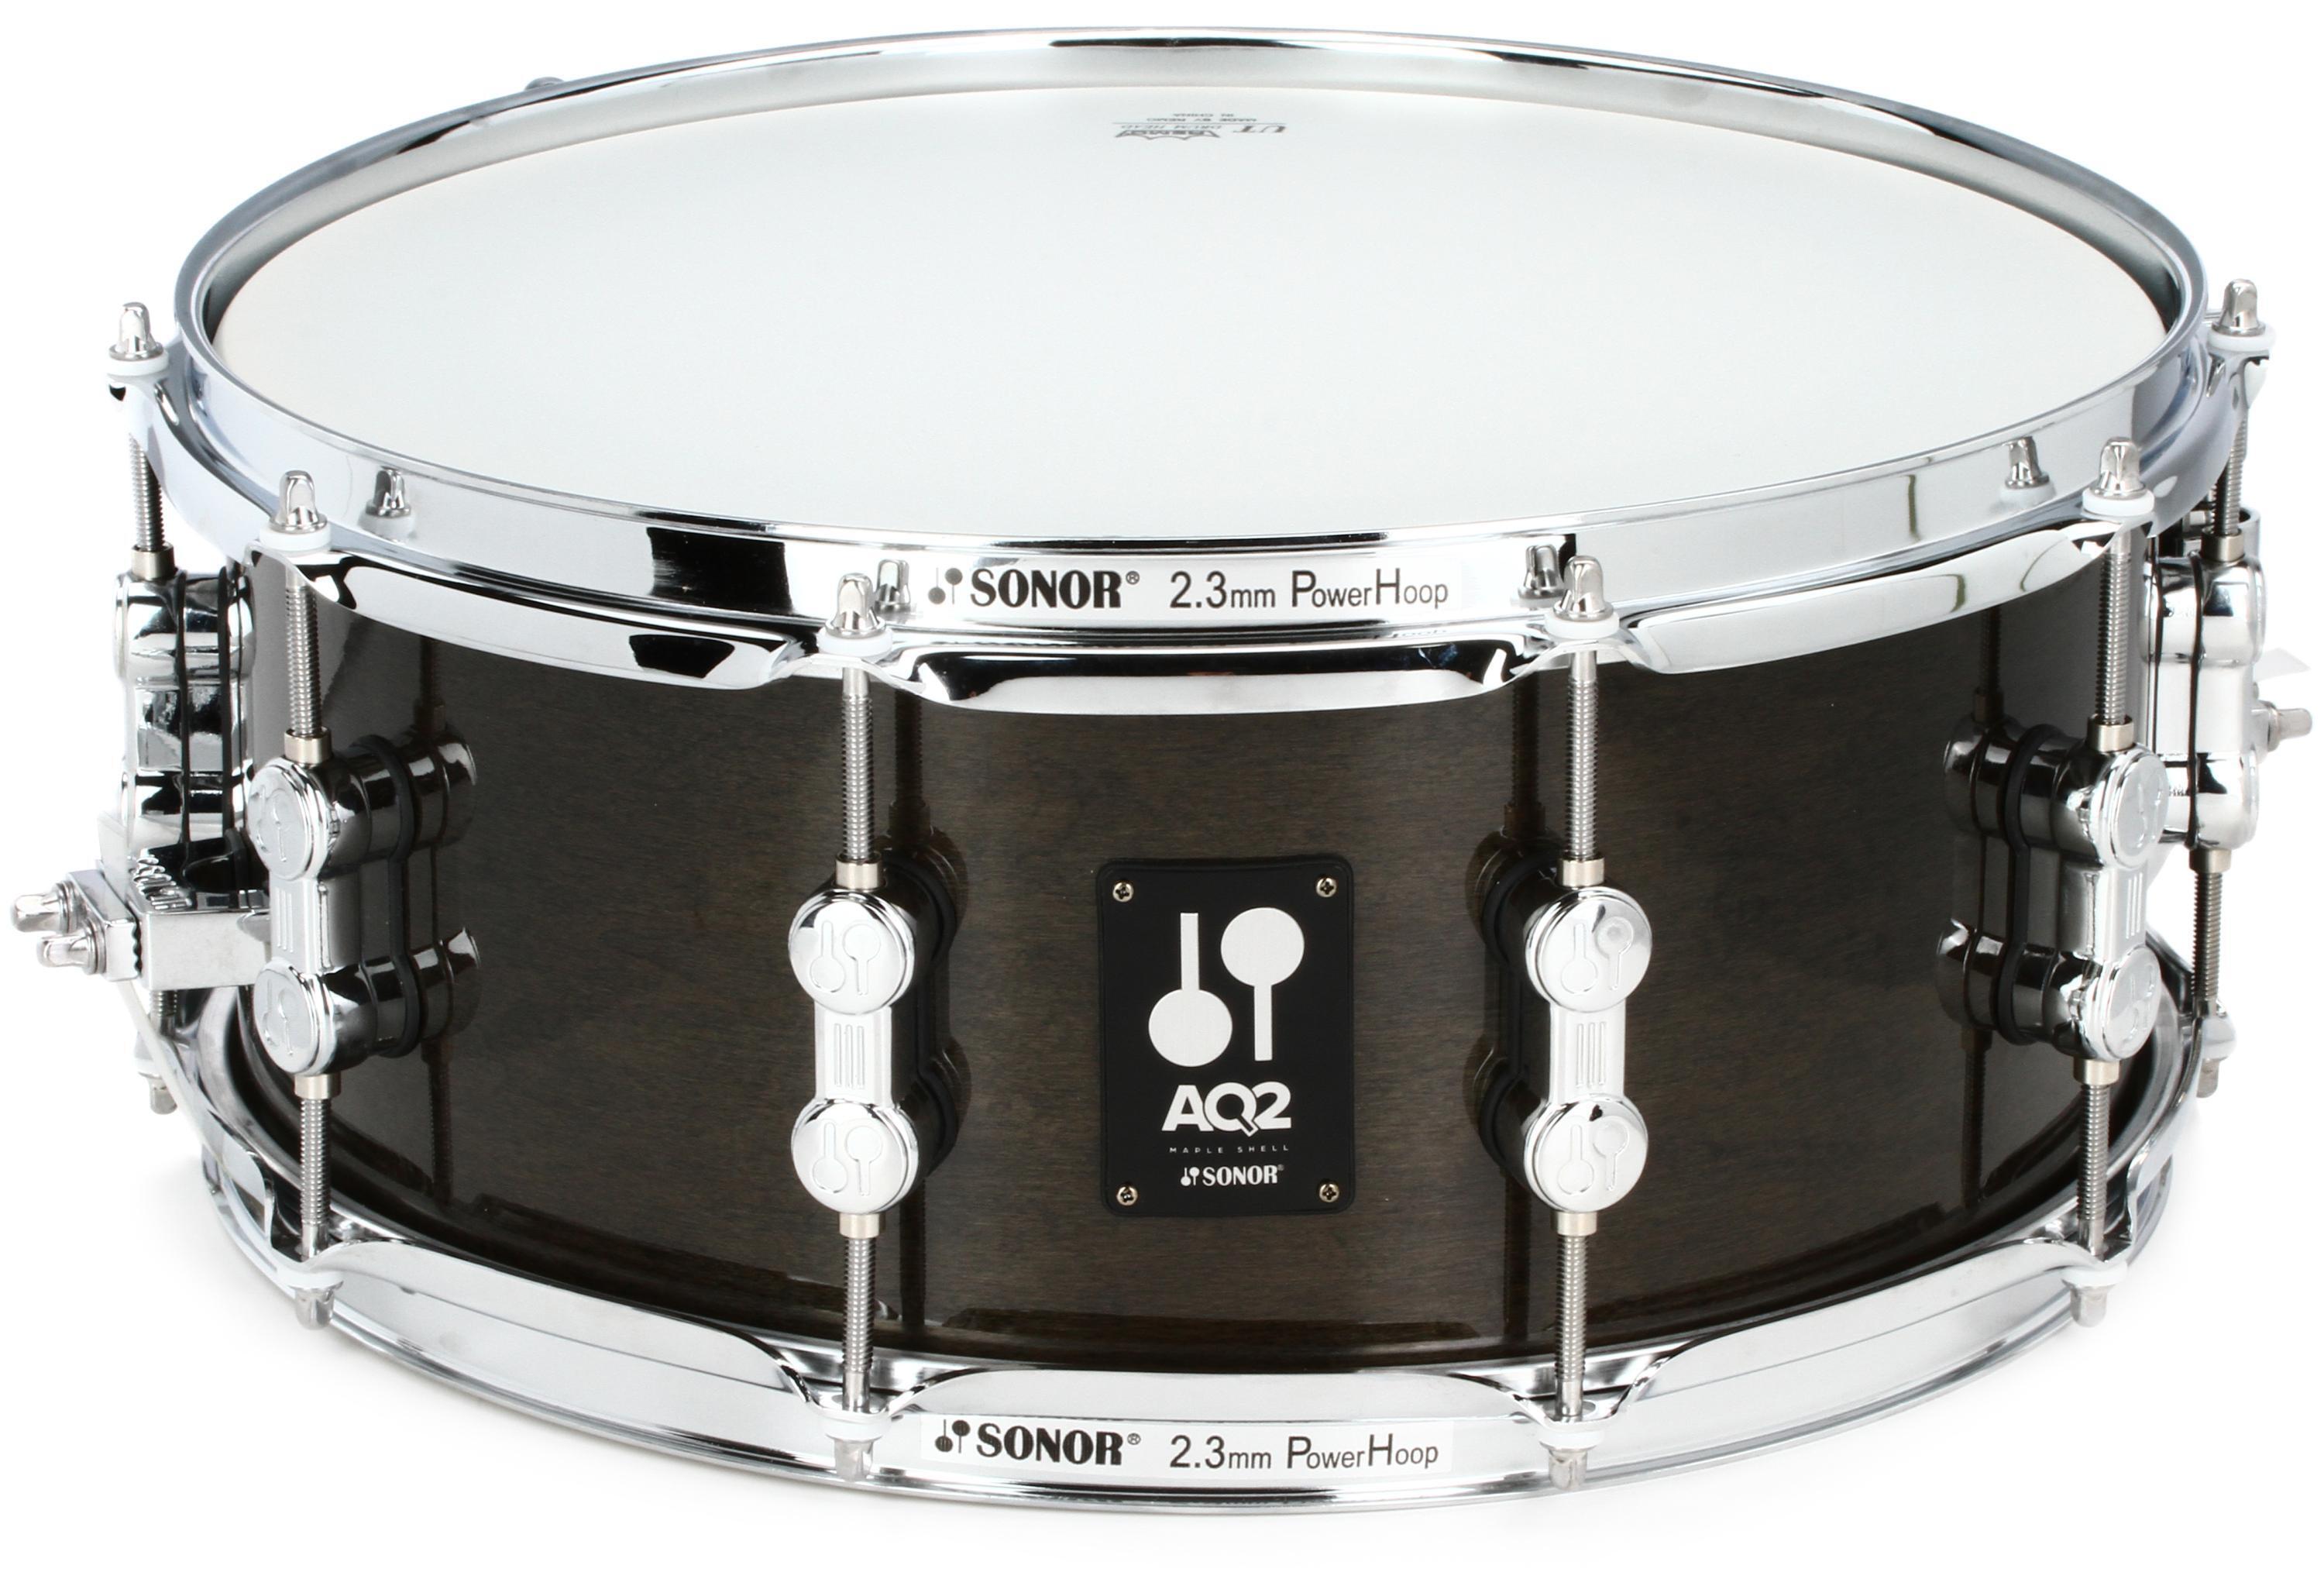 Pro Kit on Sonor AQ2 Snare Drum - 6 x 14-inch - Sweetwater